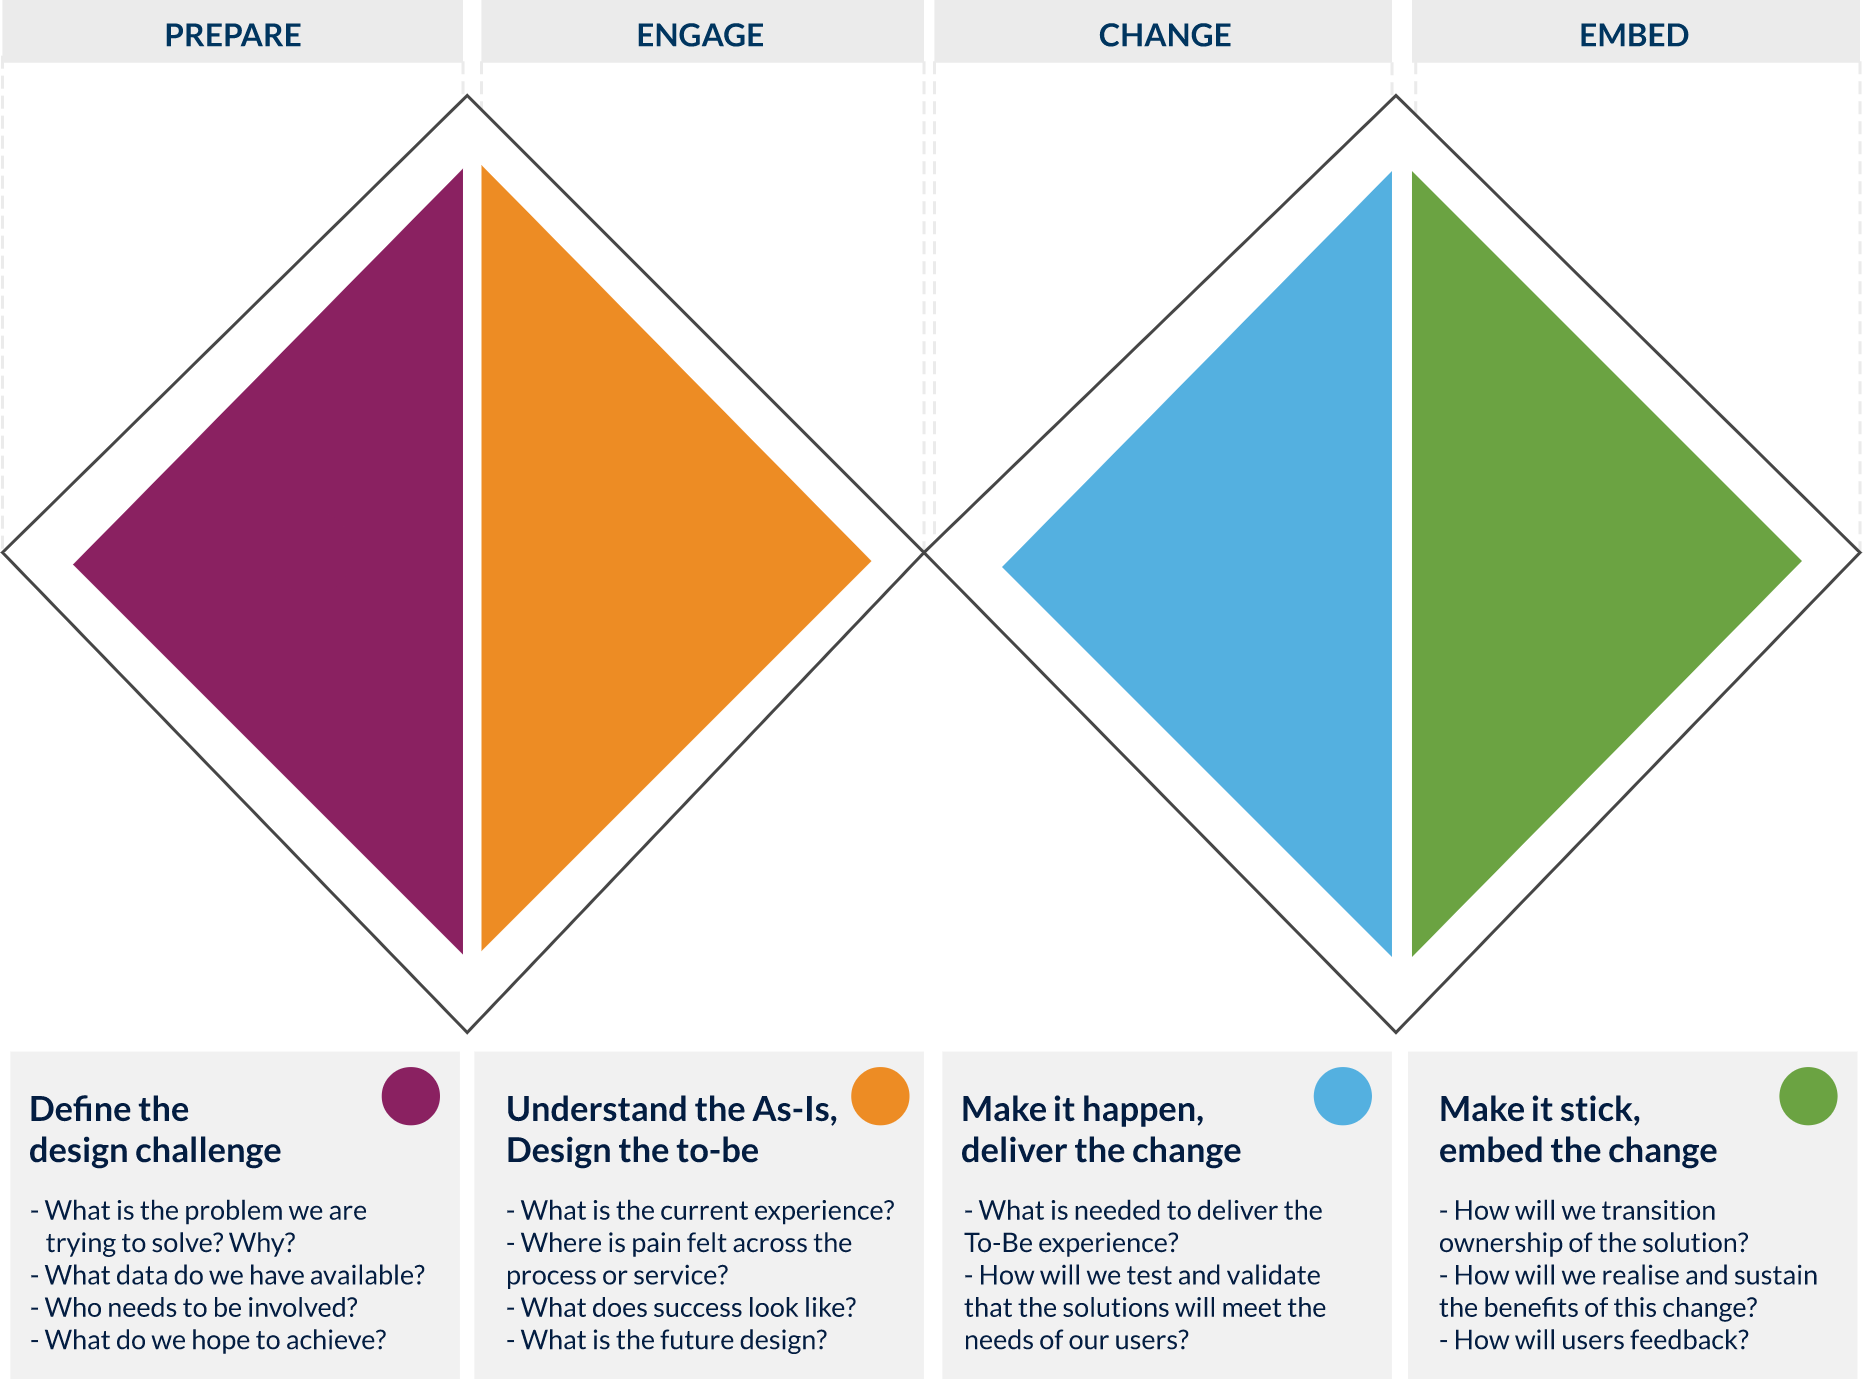 The four stages of the Design Process Prepare, Engage, Change and Embed